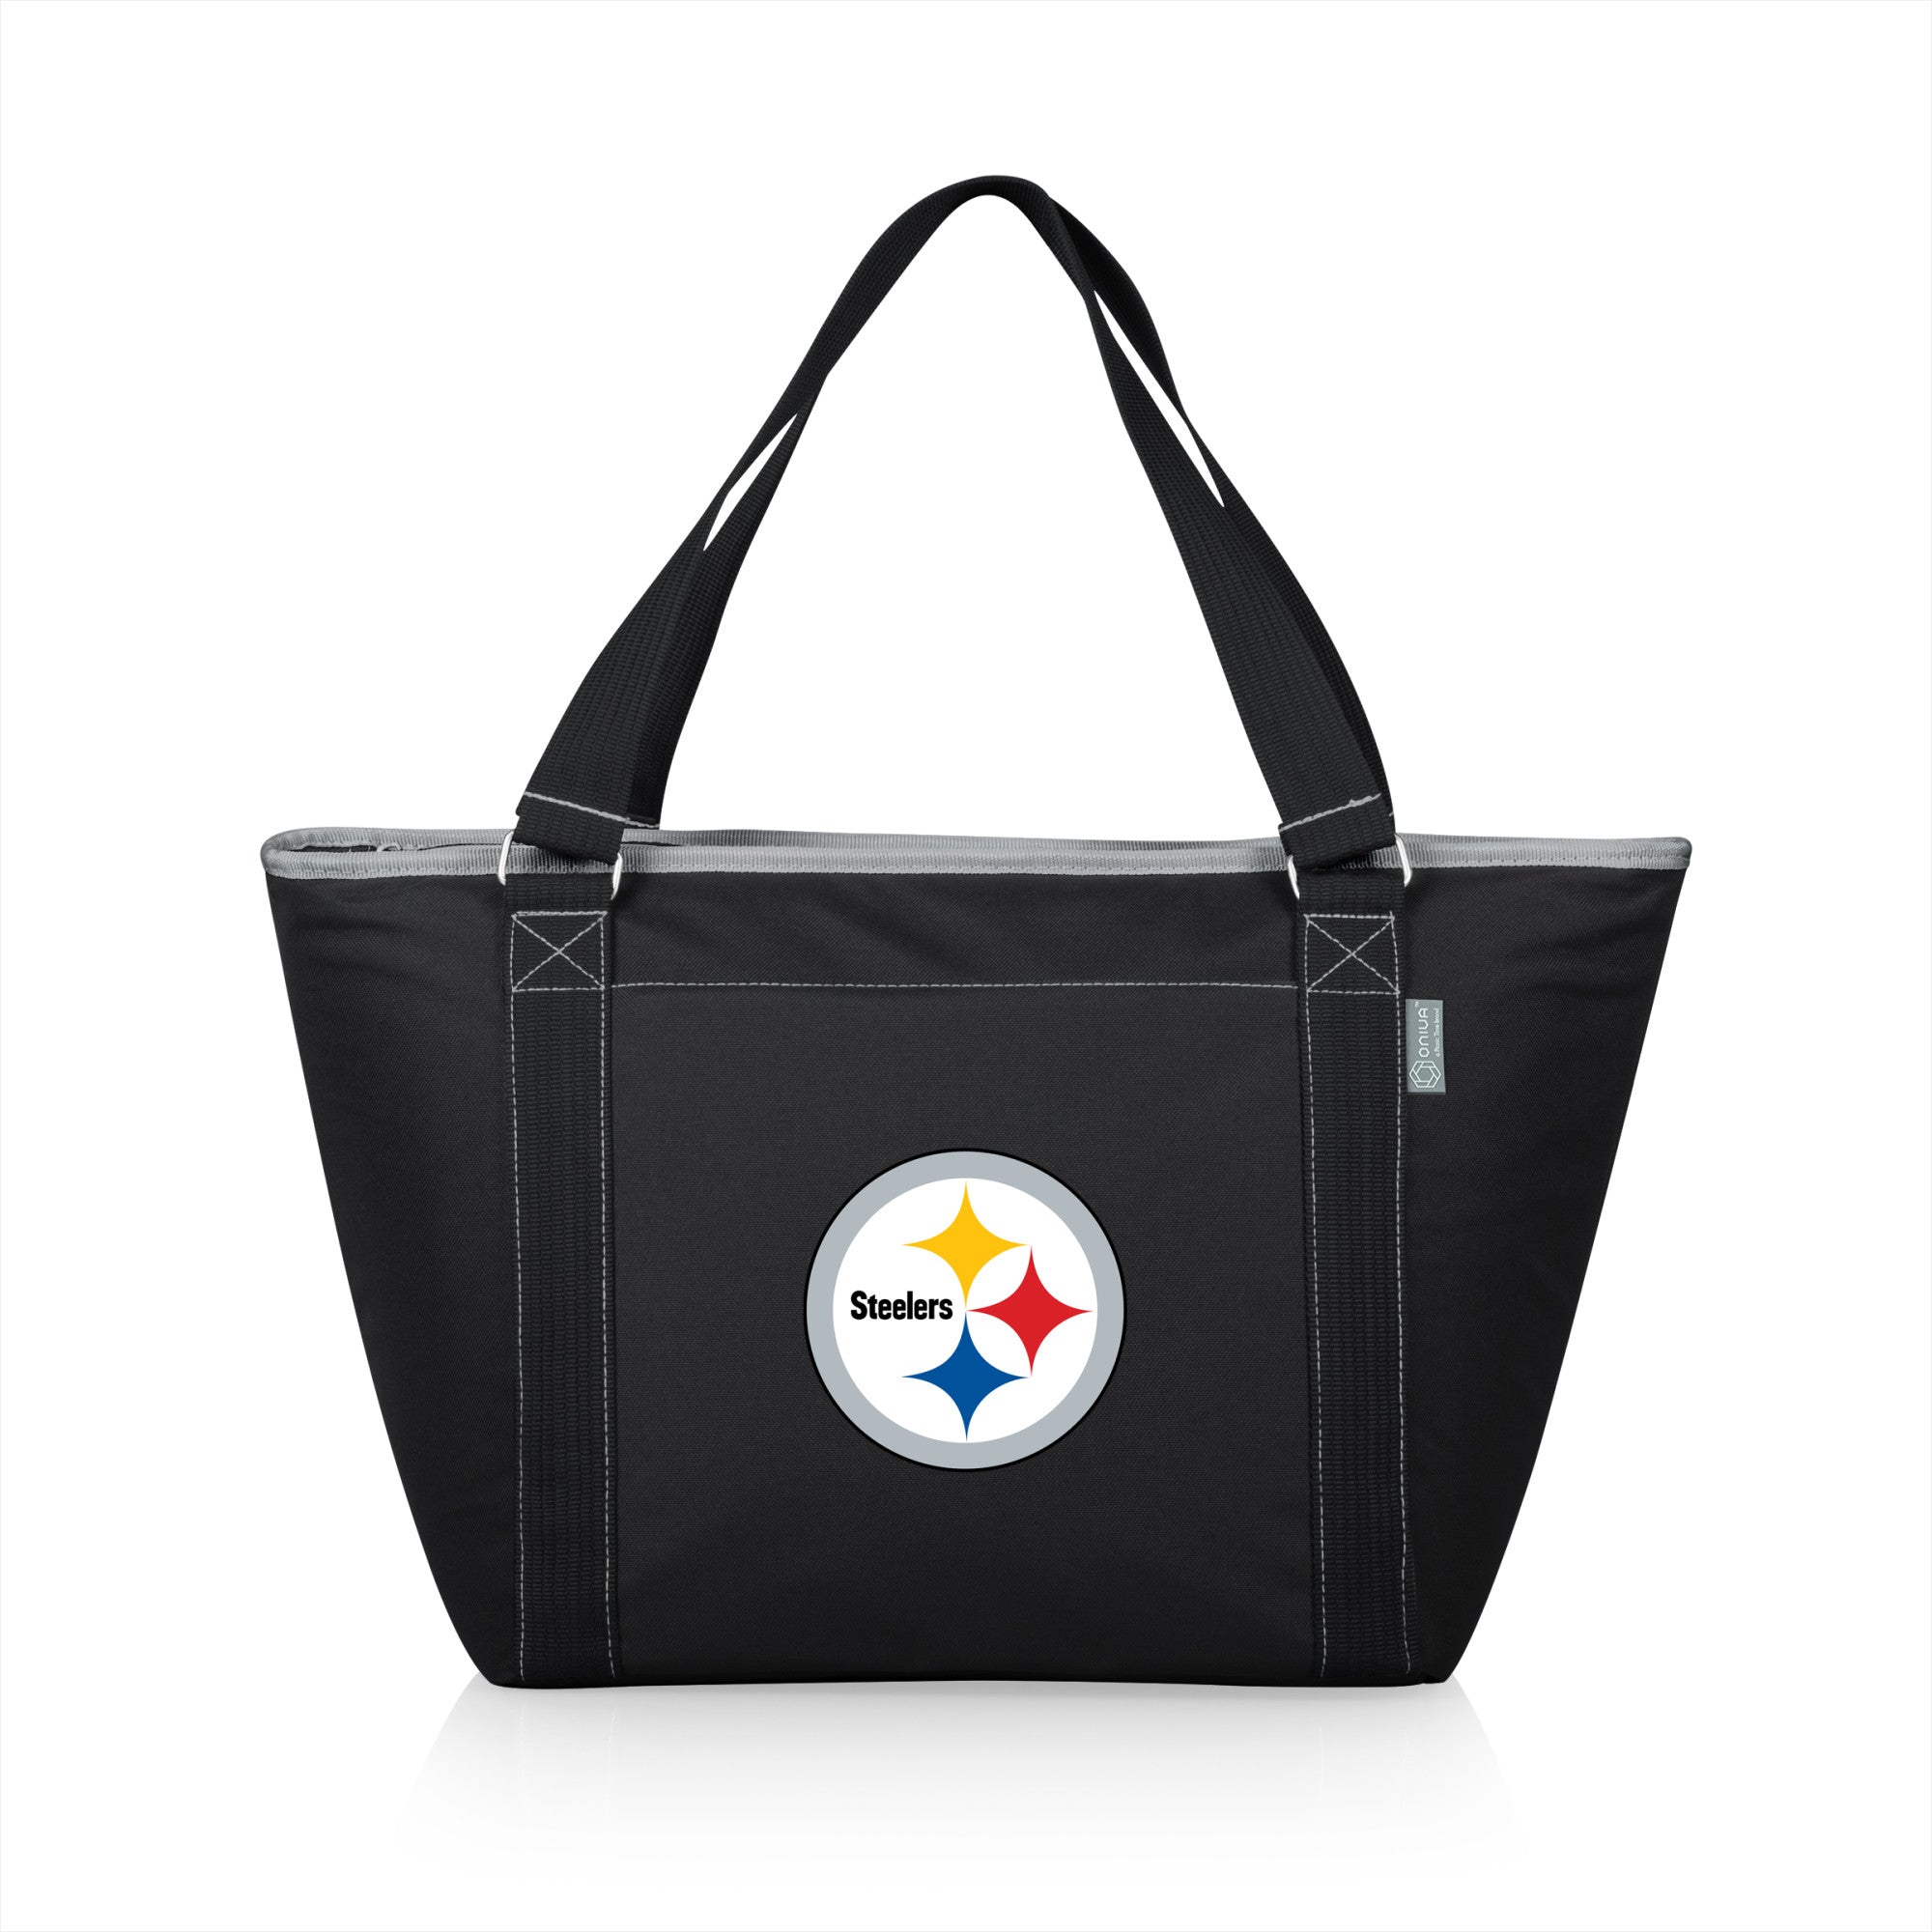 steelers lunch box